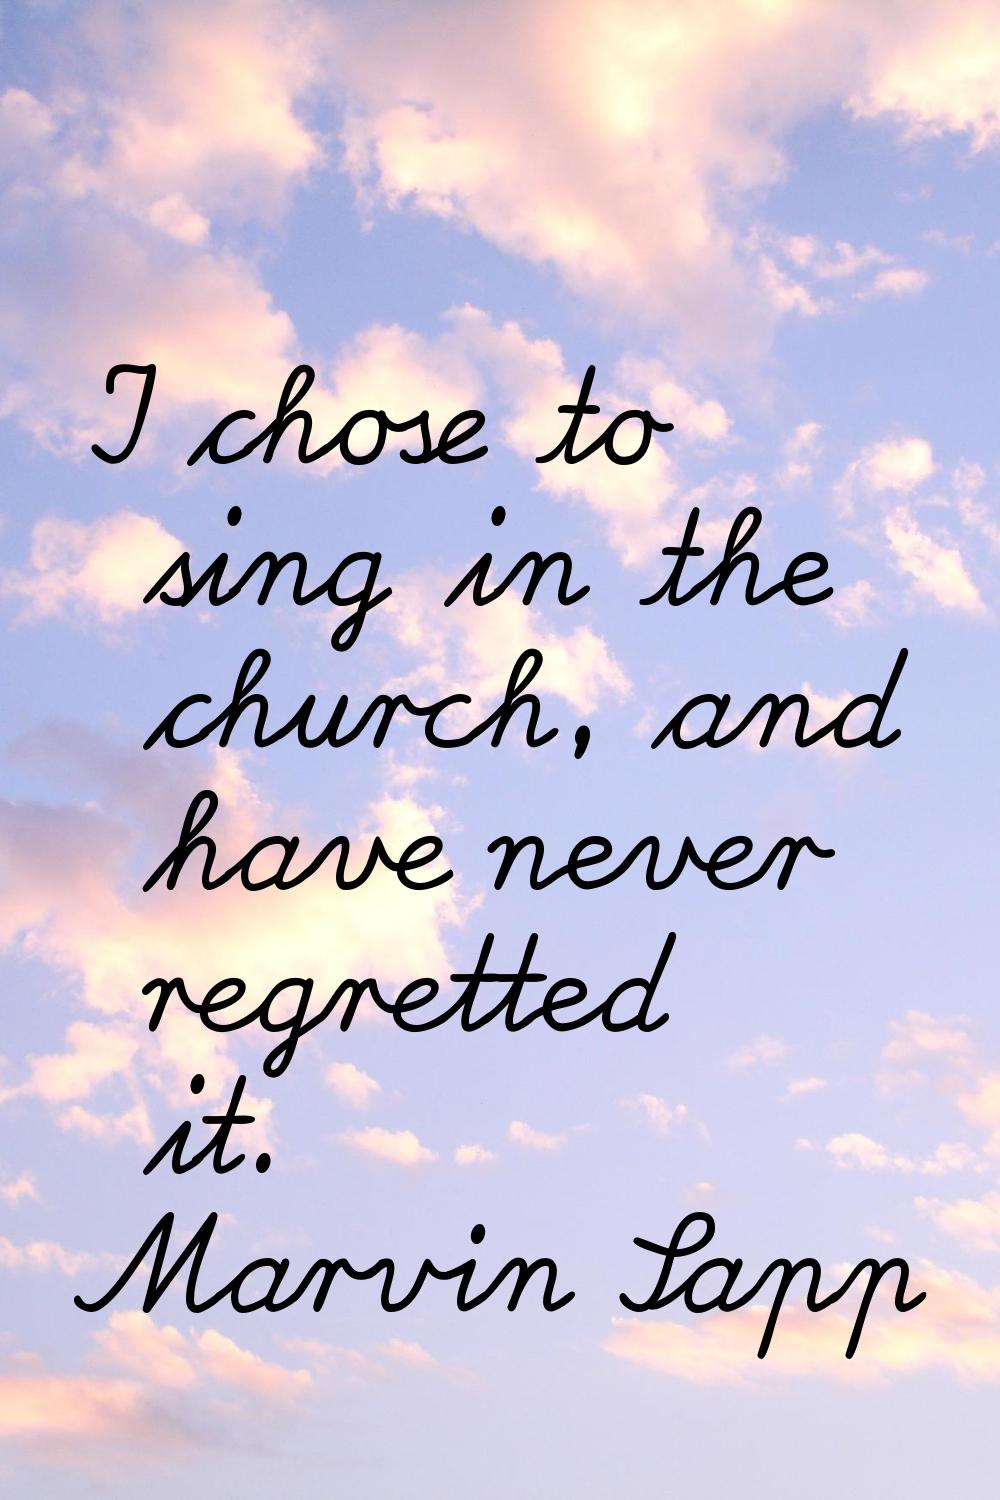 I chose to sing in the church, and have never regretted it.